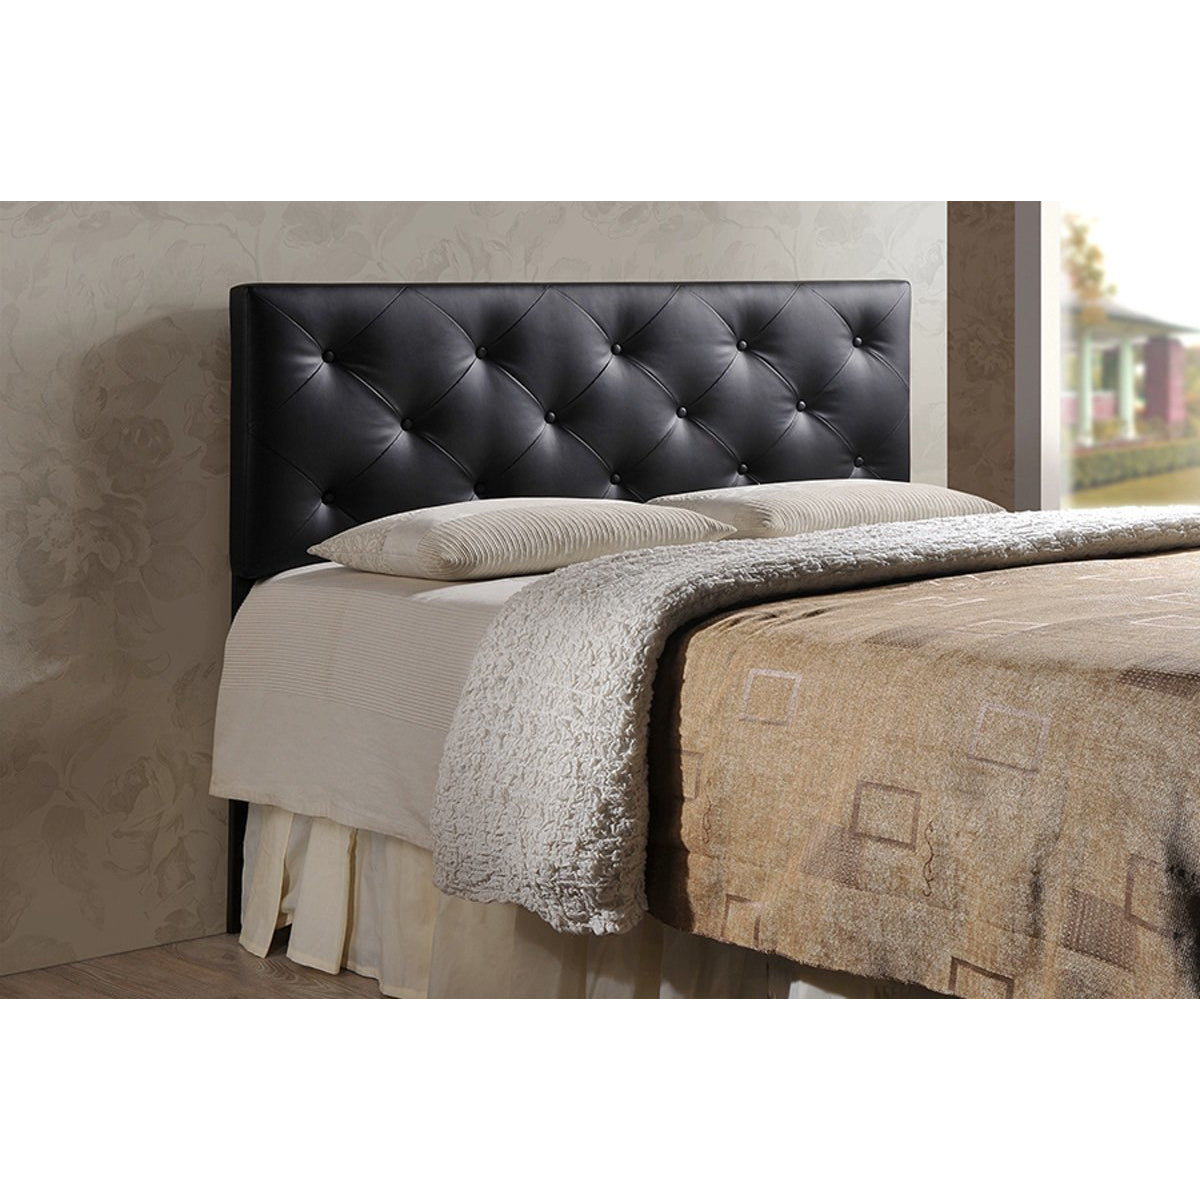 Baxton Studio Baltimore Modern and Contemporary King Black Faux Leather Upholstered Headboard Baxton Studio-Headboards-Minimal And Modern - 2